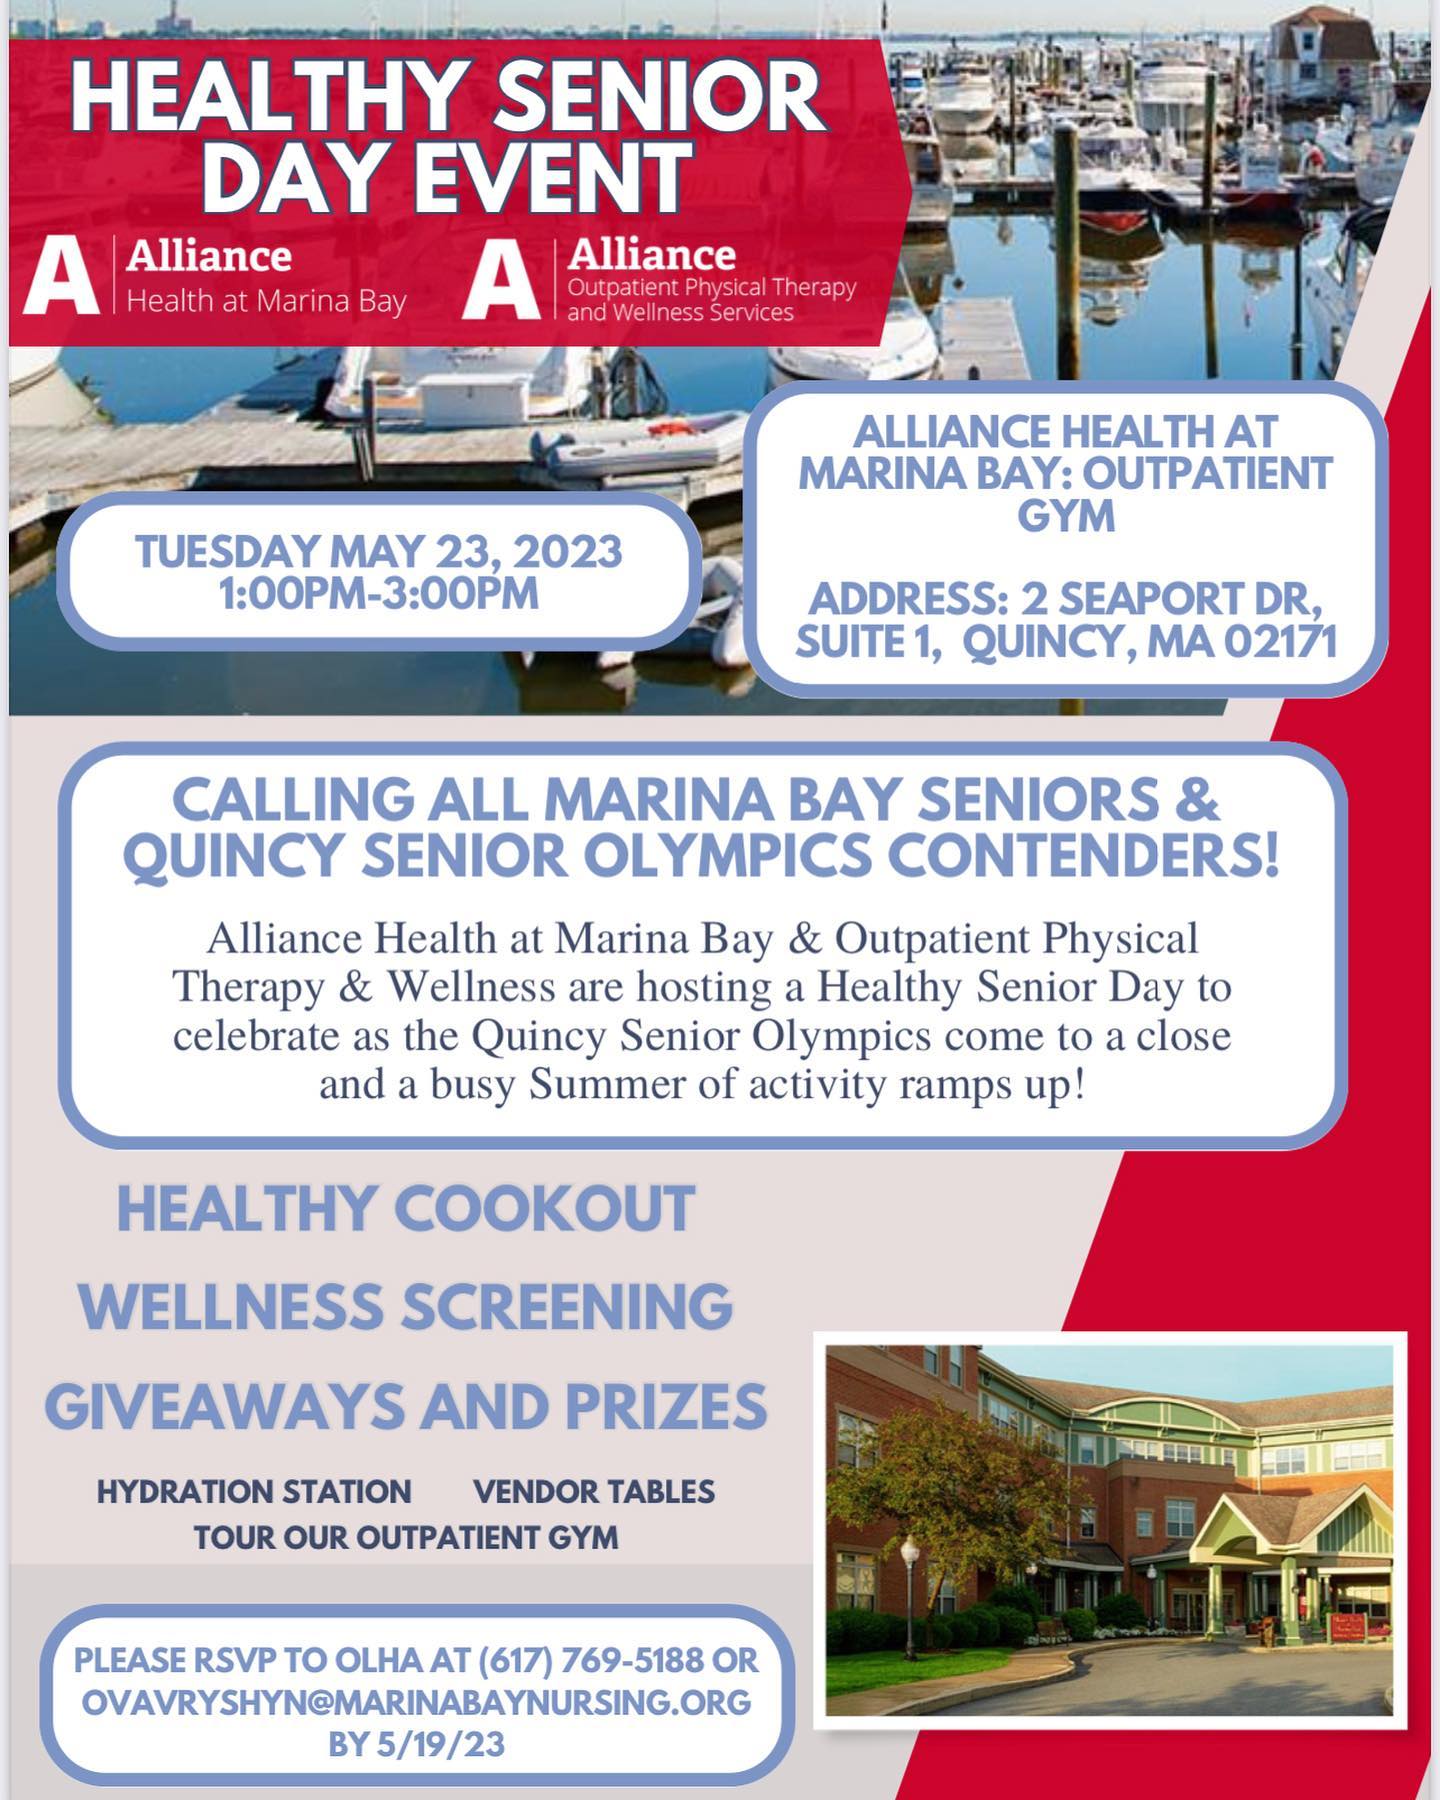 MBBA member @alliancemarinabay_oppt is hosting a healthy senior day event! Healthy cookout, wellness screenings, giveaways and prizes!If you are interested in attending or becoming a vendor, call 617.769.5188 or email ovavryshyn@marinabaynursing.org